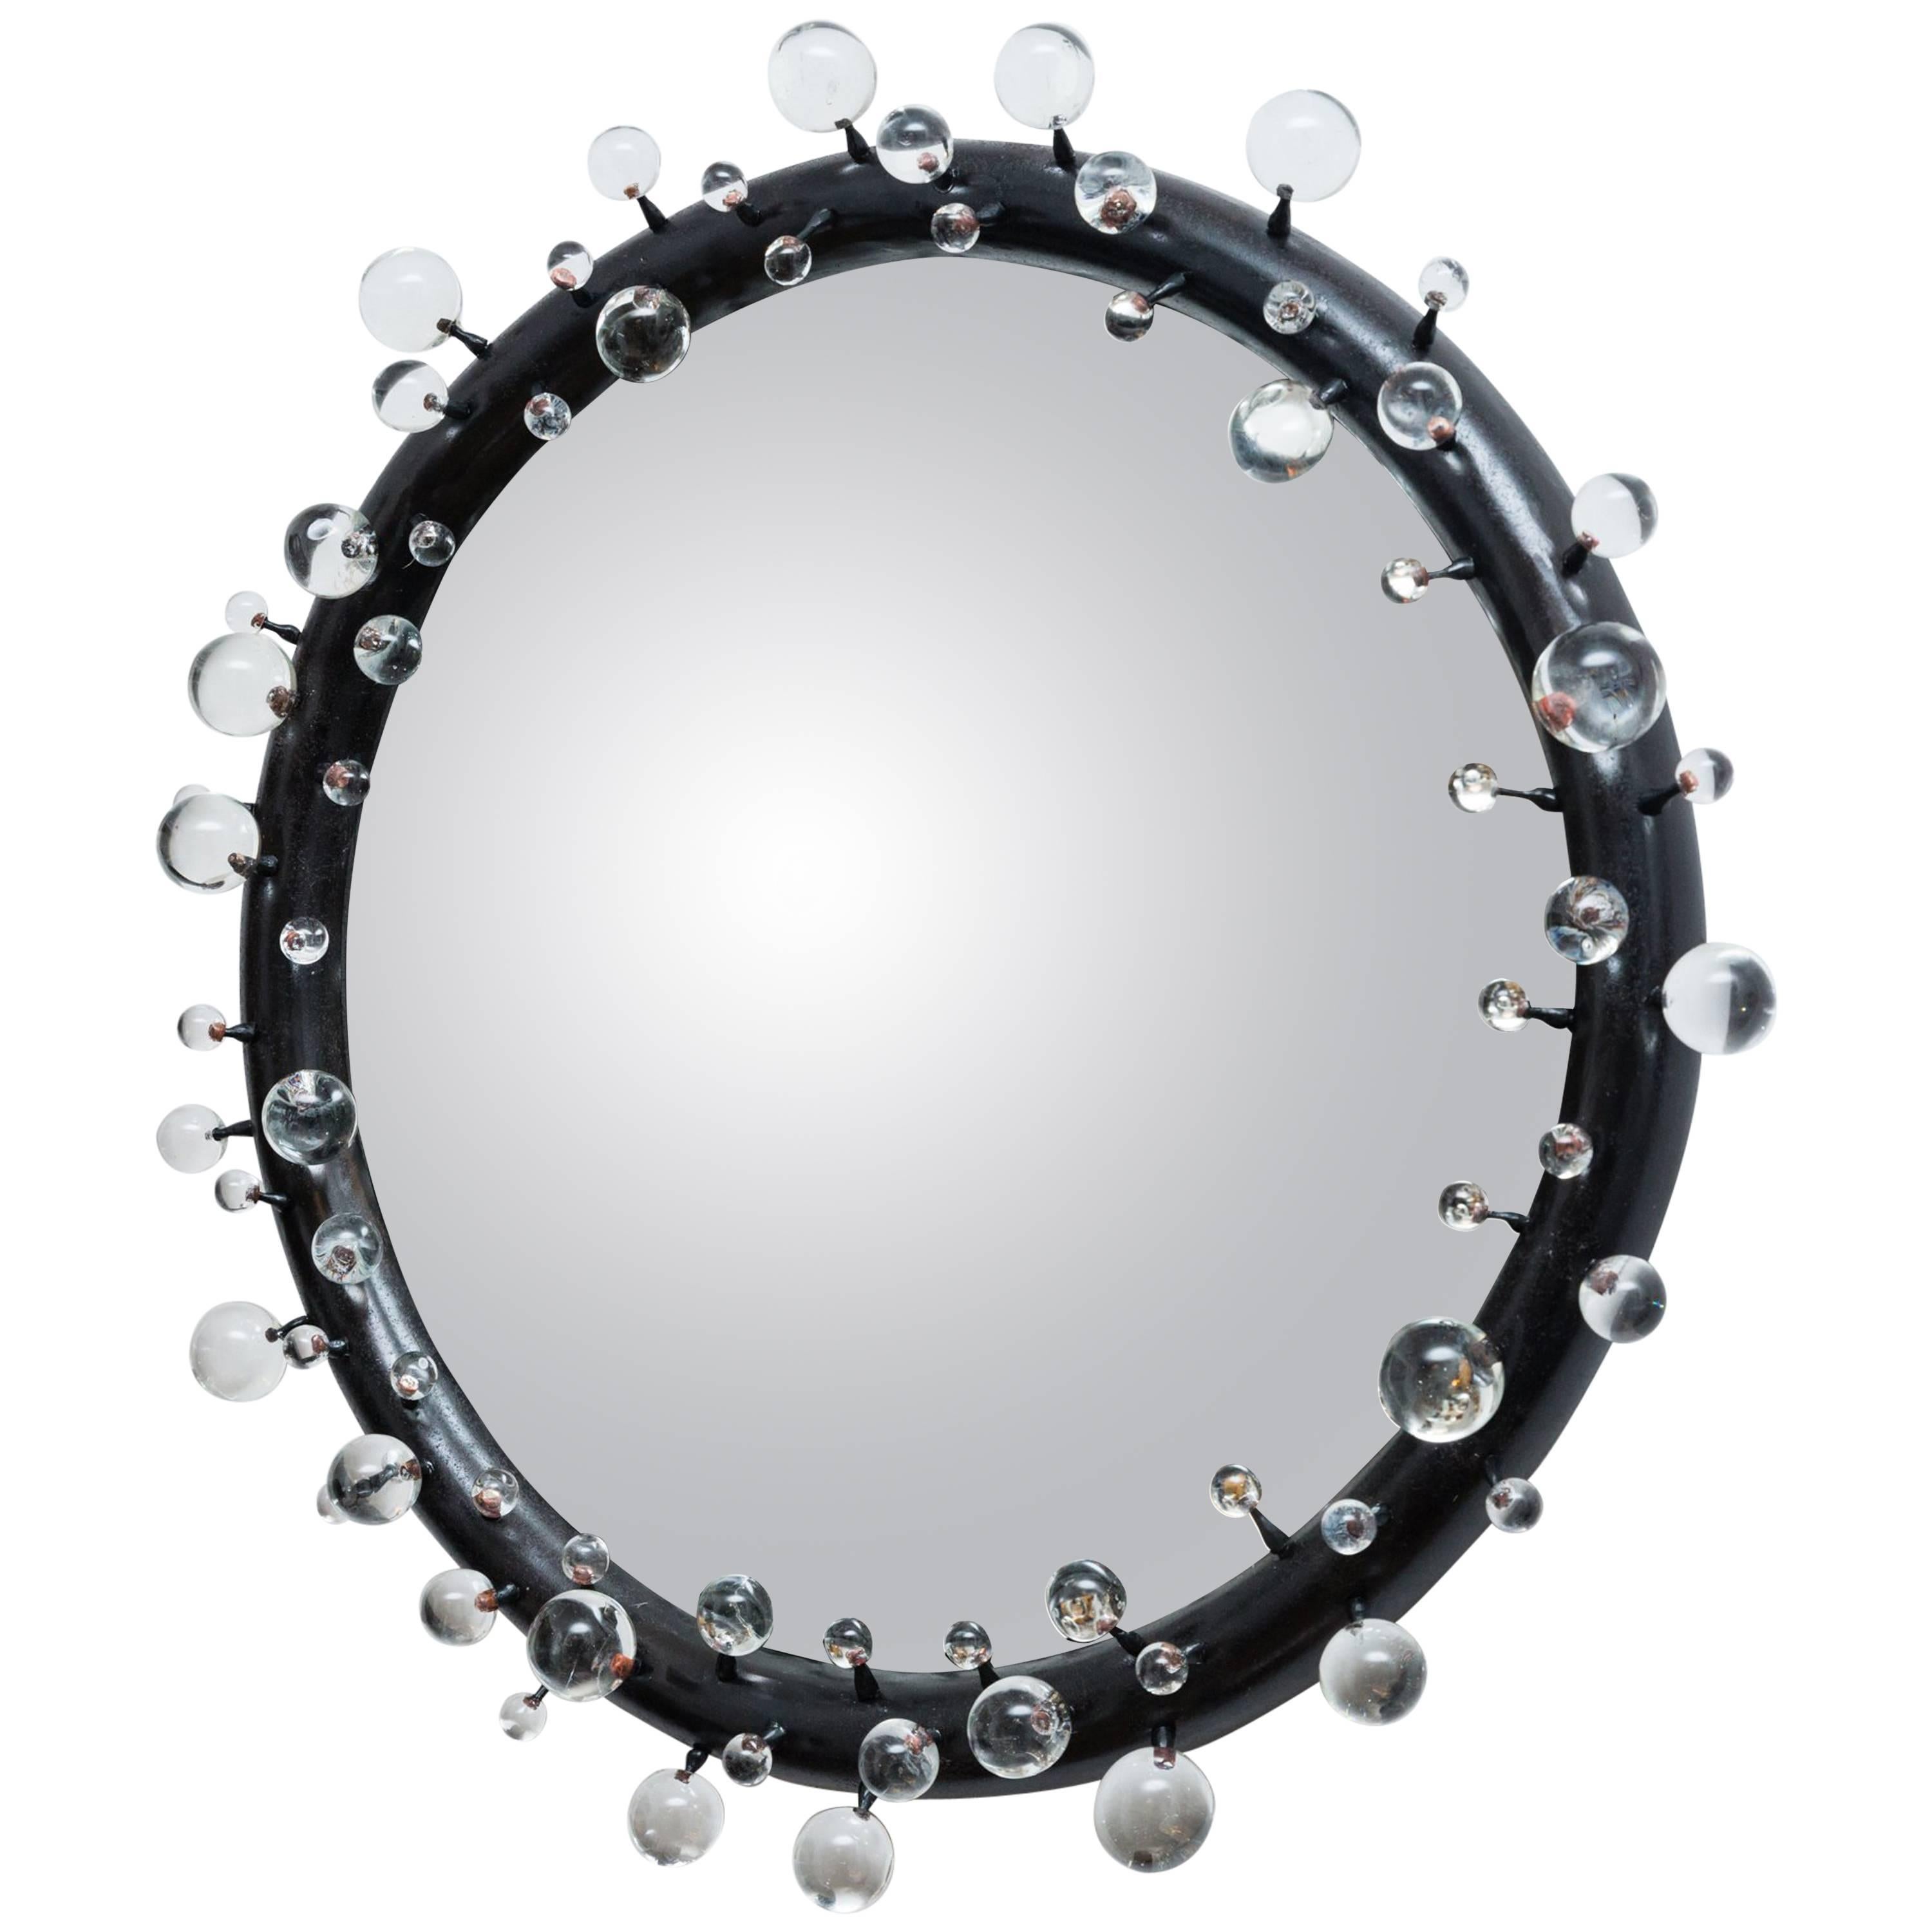 Amazing Convex Mirror Object For Sale